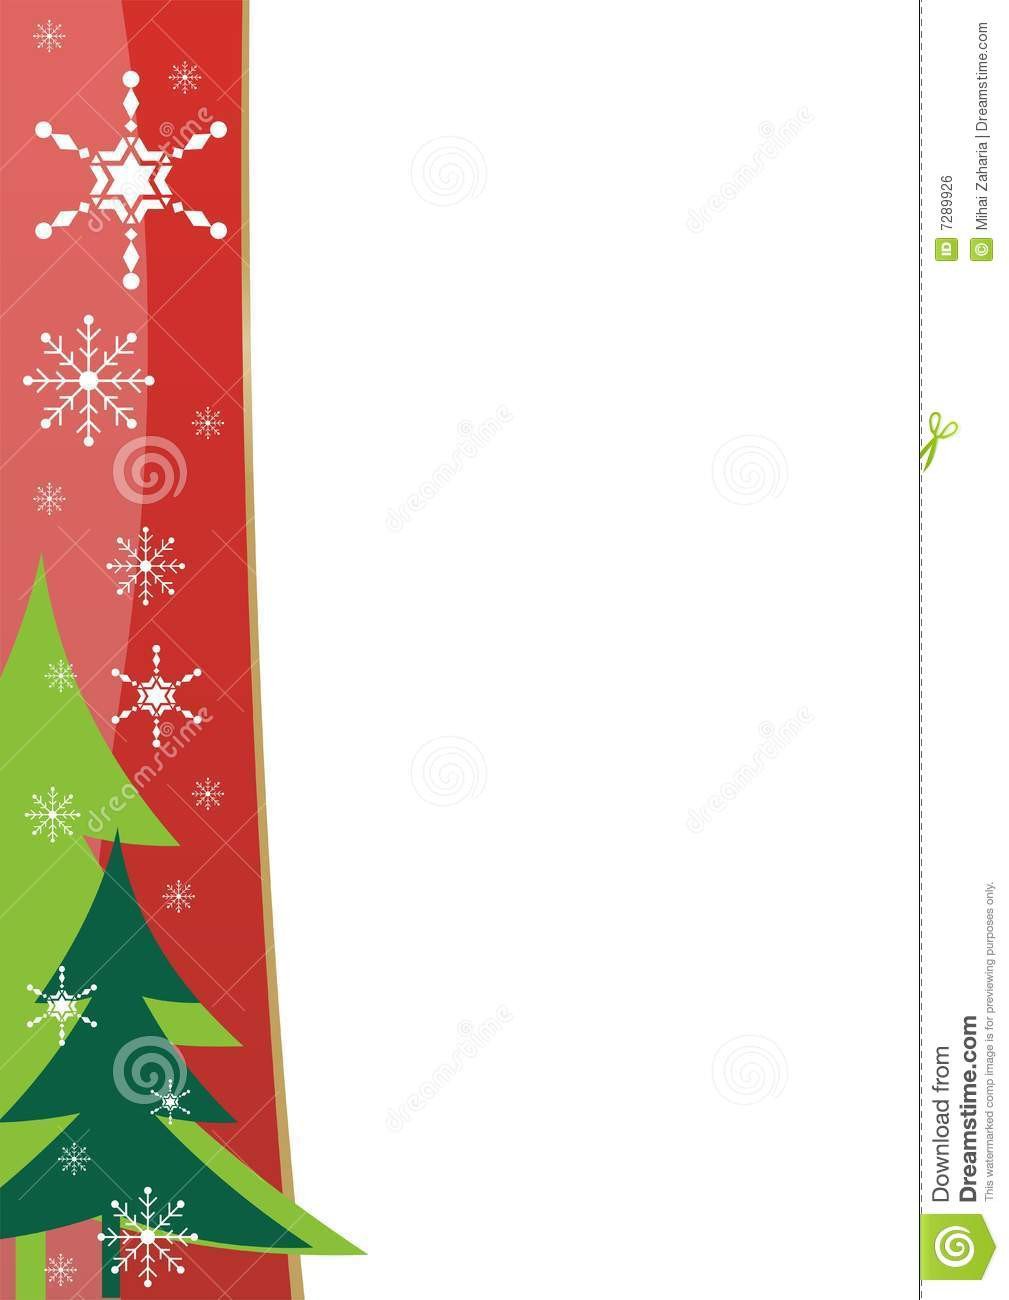 Christmas Word Templates Free Download – Festival Collections